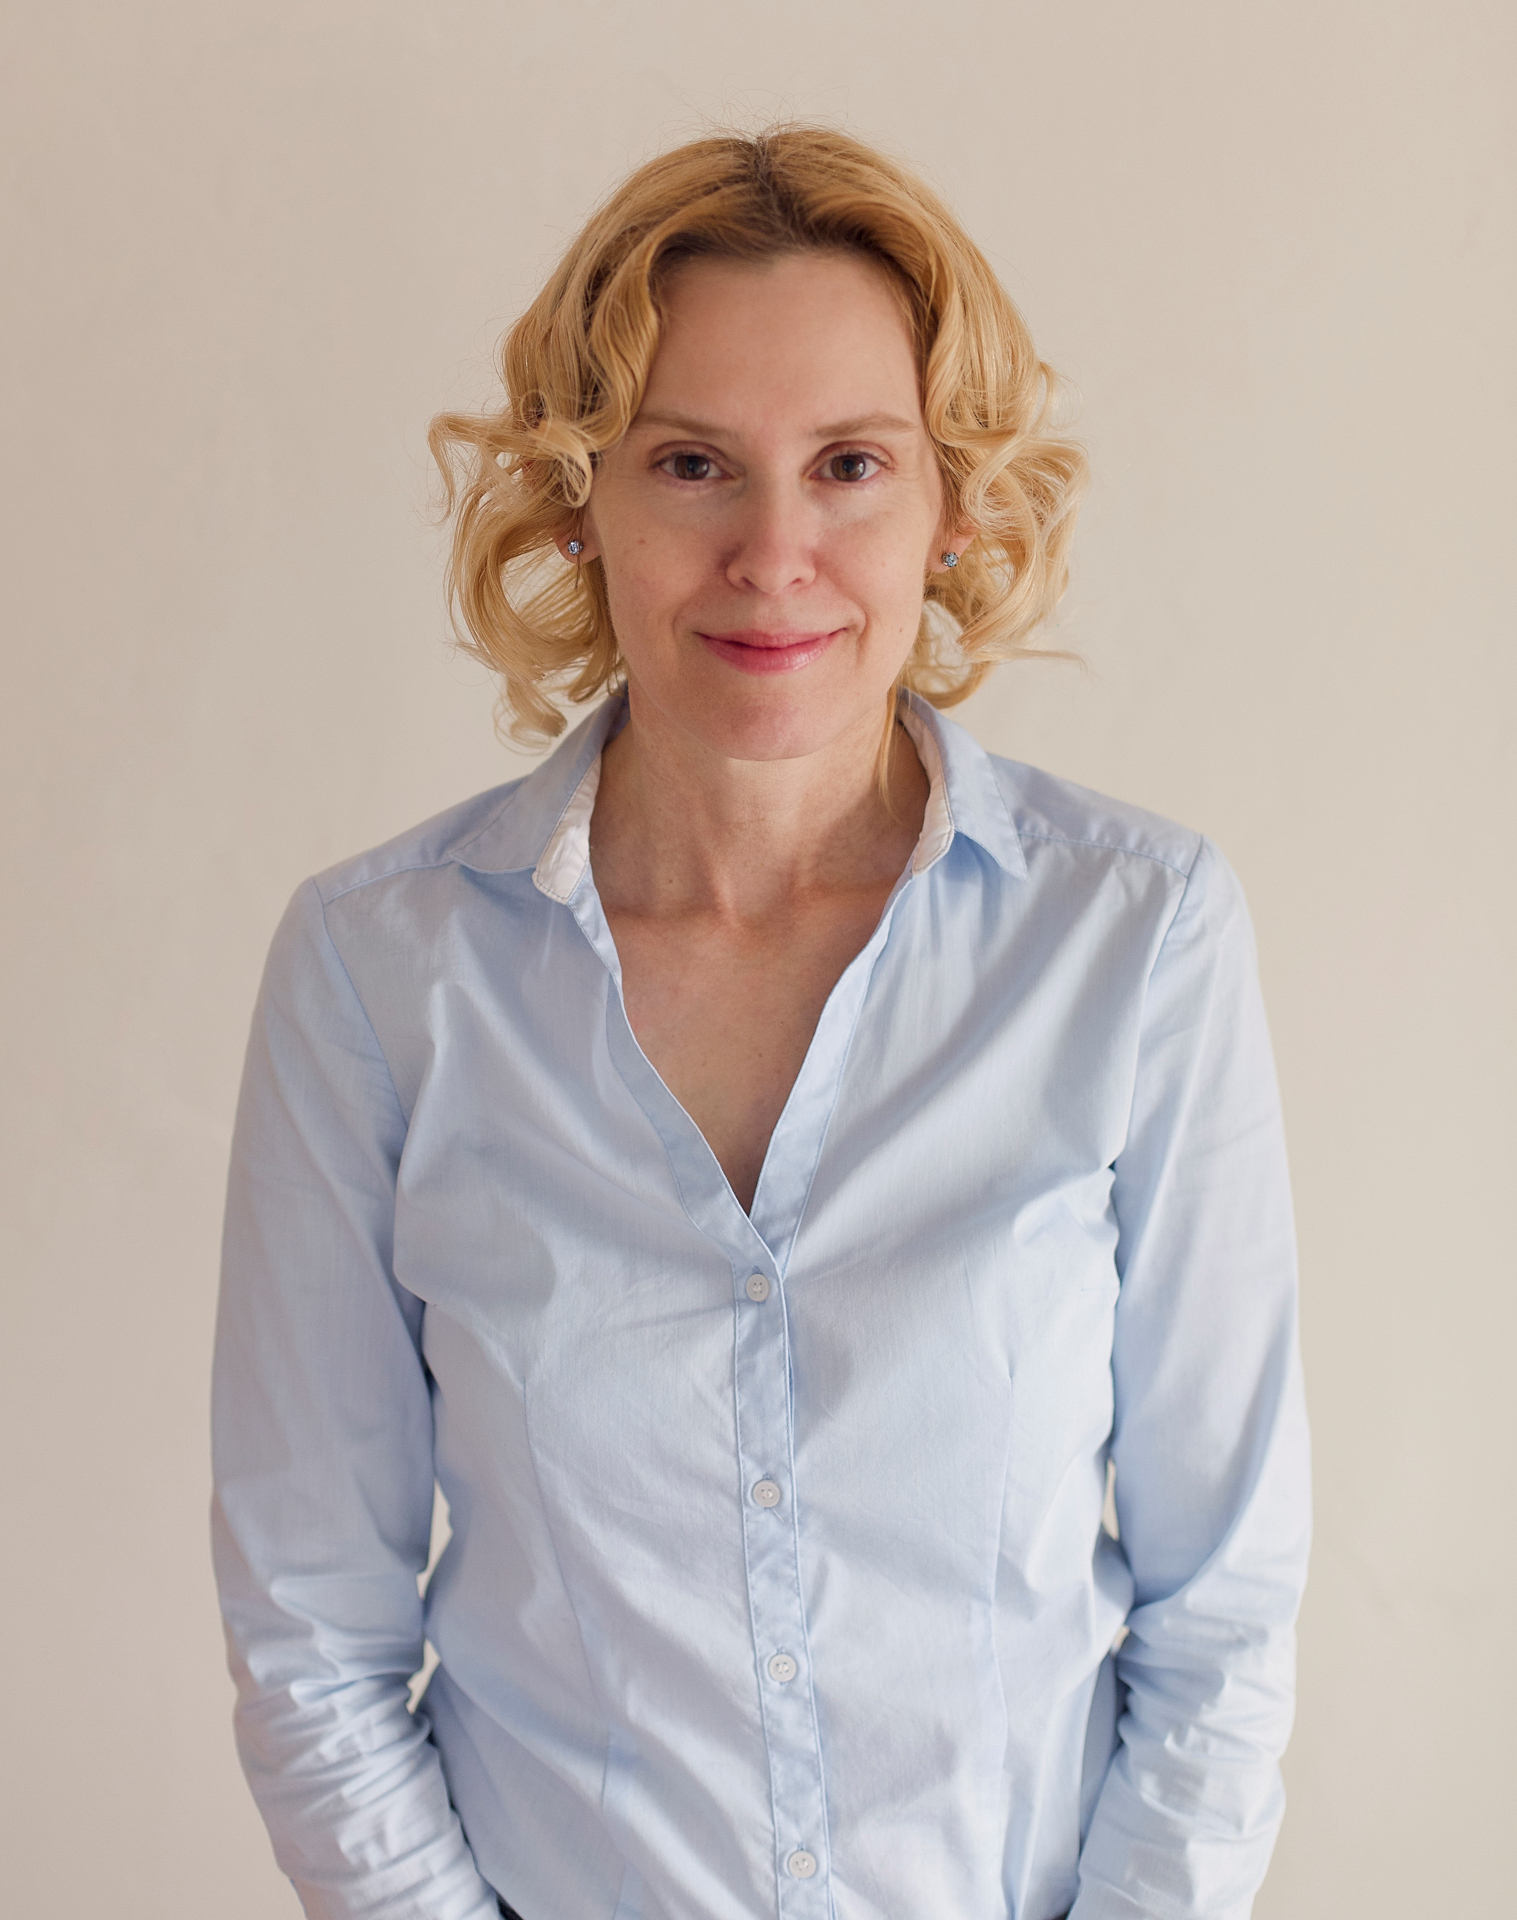 Donna Knifong wearing a blue shirt on white background.